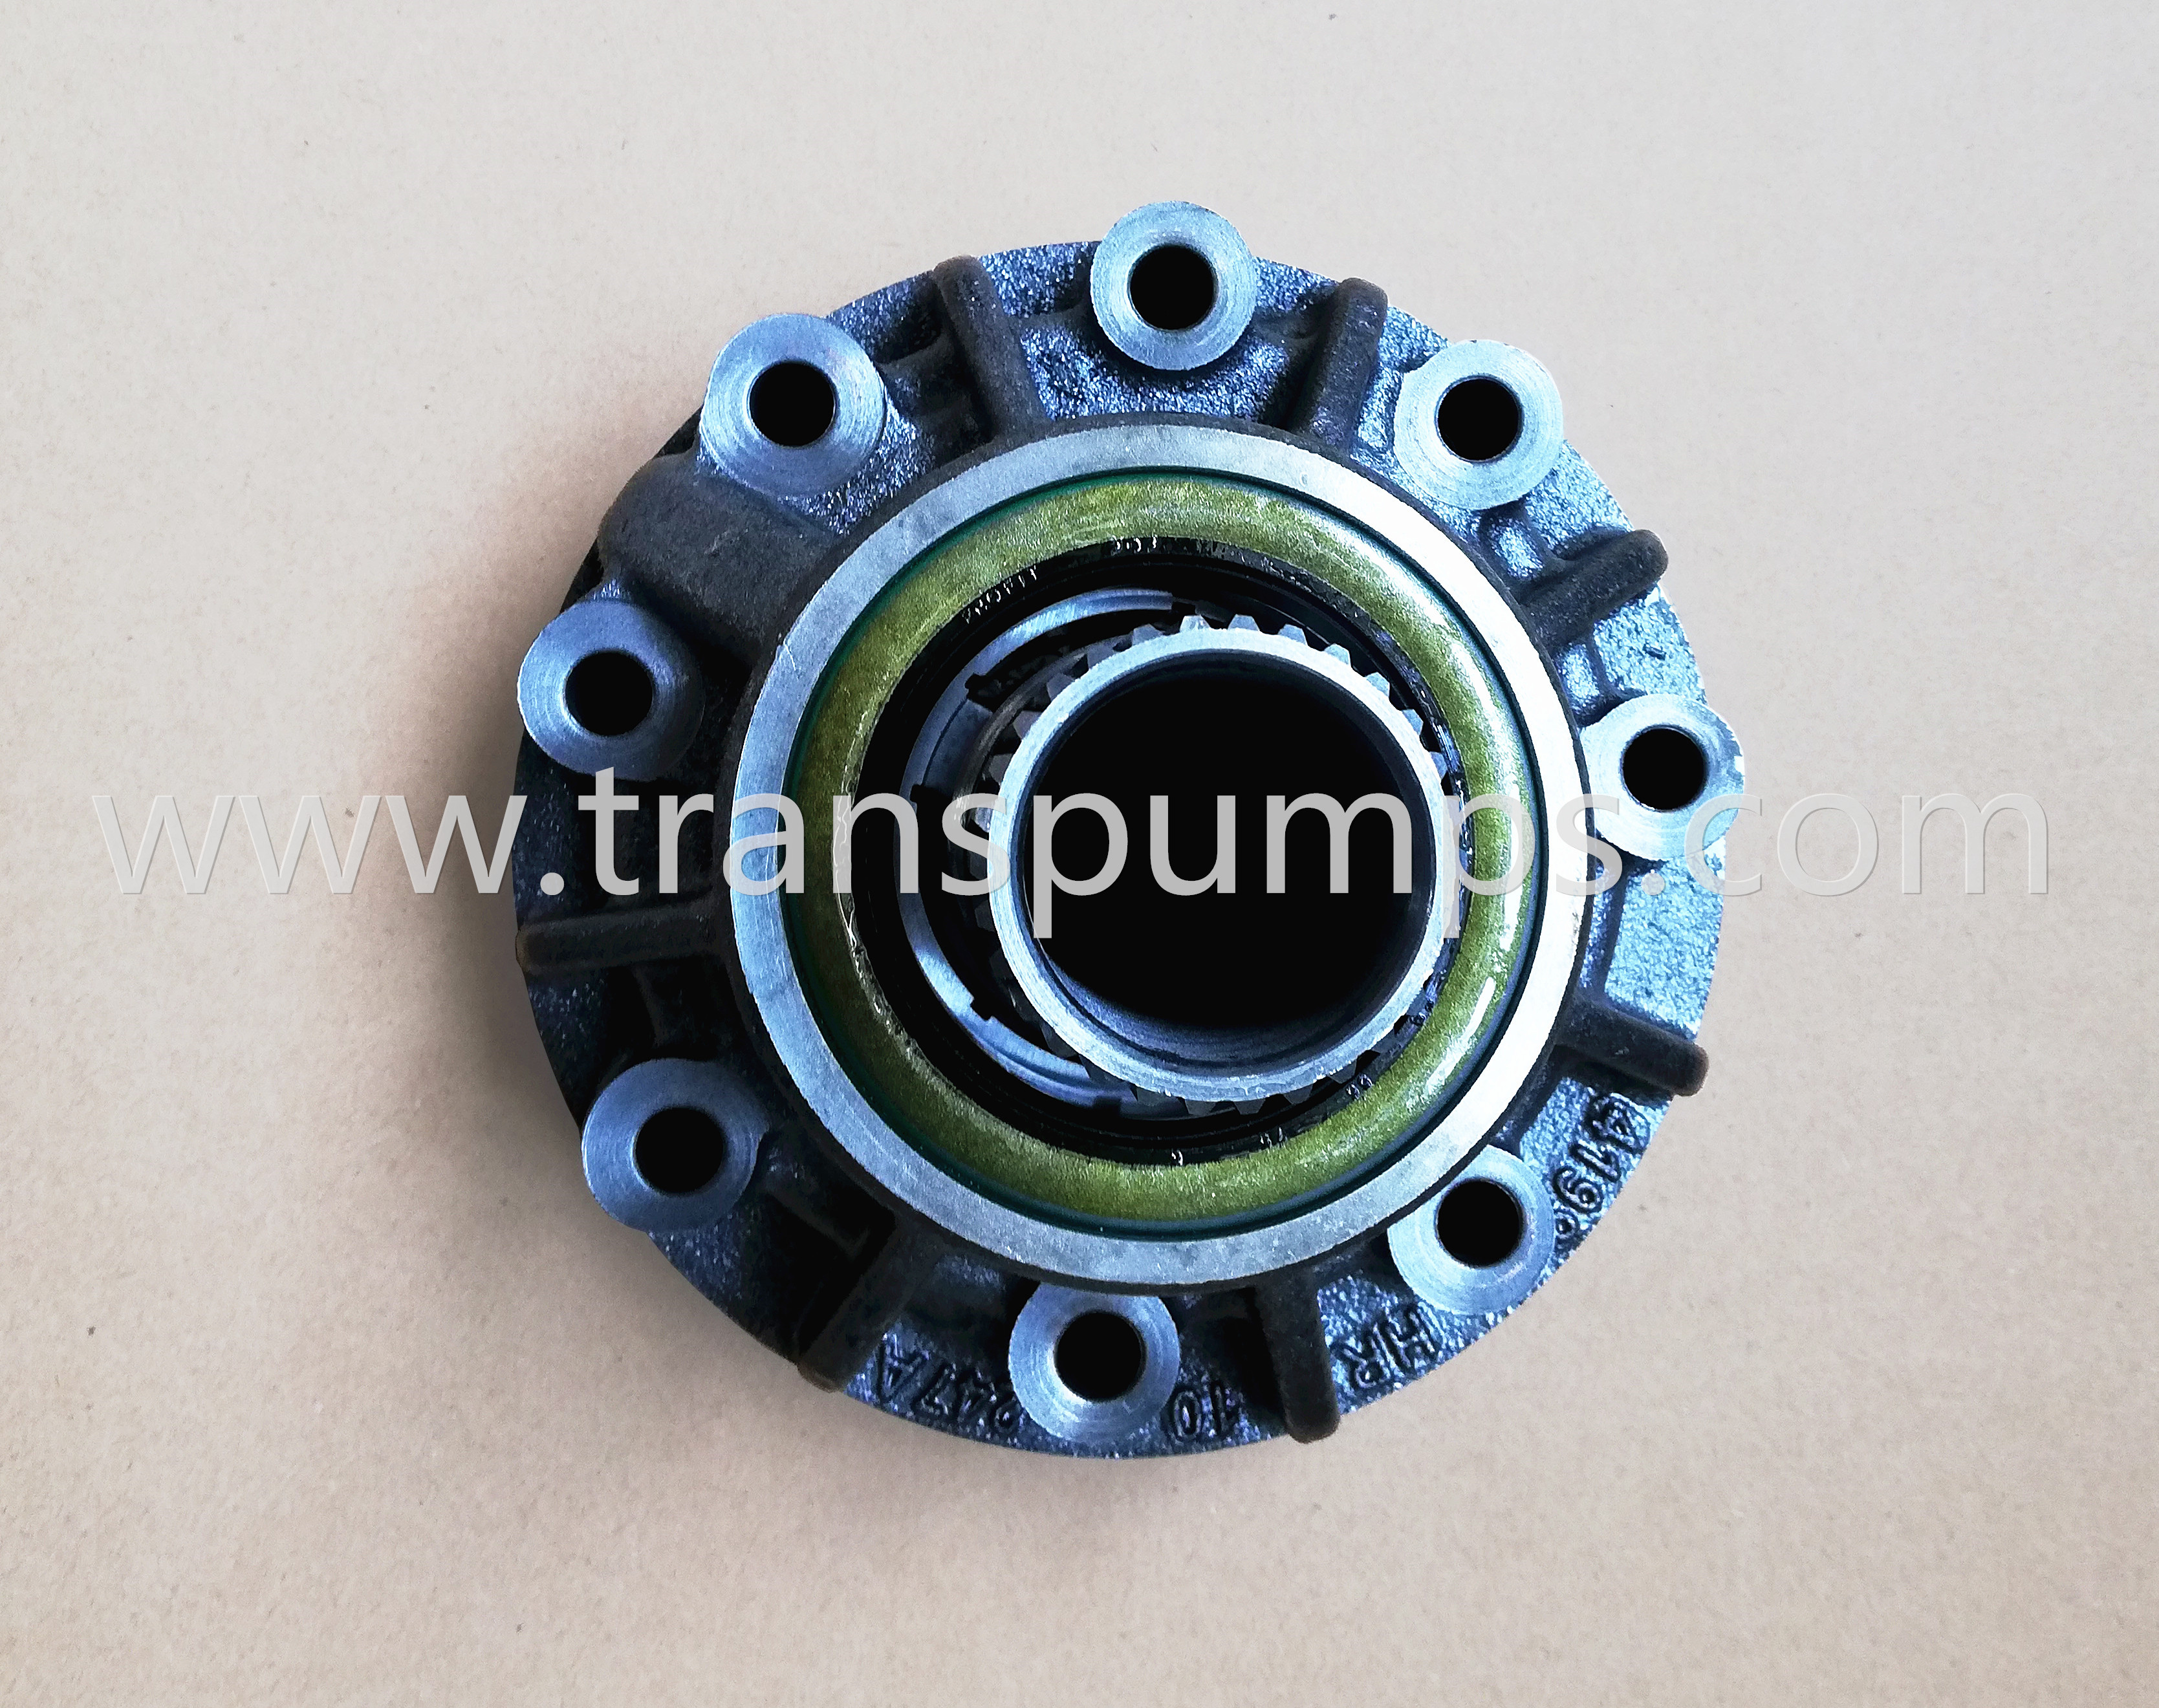 ZF pump manufacturer, after market transmission pump, ZF pump 050122220664, after market transmission pump, John deere backhoe charge pump, ZF Pump Assembly Transmission, ZF transmission pump assembly 0501220664, Насос, 0501.220.664 OR 0501220664 OR 0501-220-664 OR 0501 220 664 ZF, ZF 0501220664 pumpe, New original ZF 0501220664 pump, ZF bomba, ZF pompa, ZF hacoc, ZF pumpe, ZF pompe